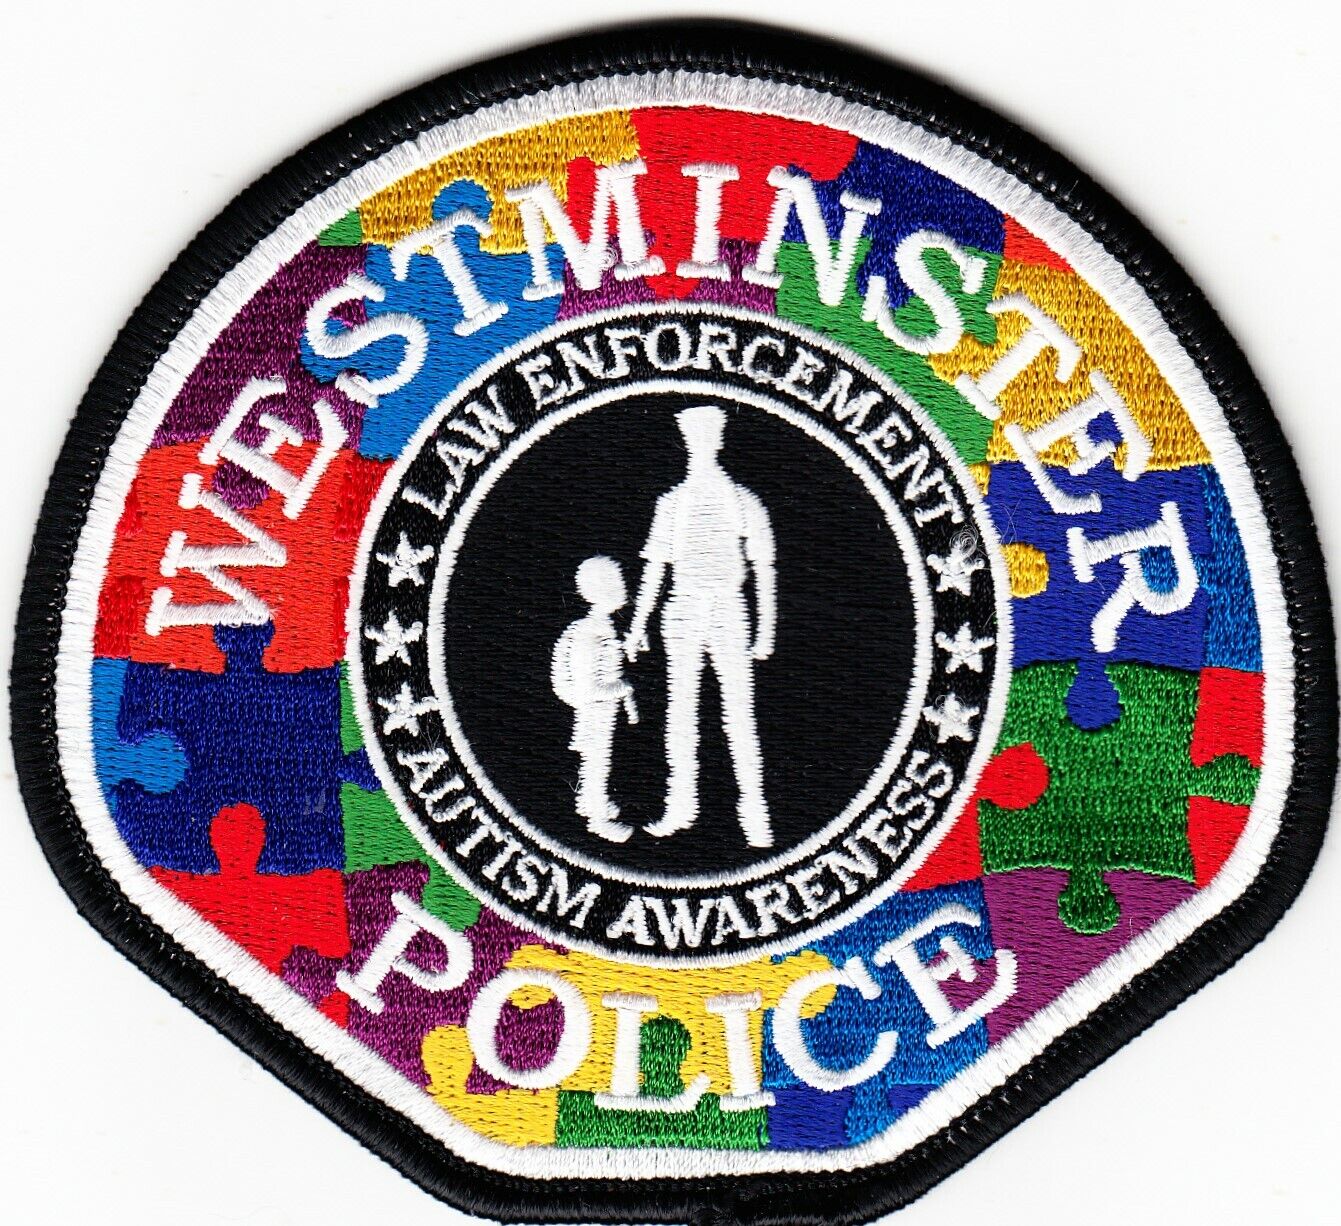 CALIFORNIA  - WESTMINSTER POLICE DEPARTMENT  AUTISM AWARENESS    Patch